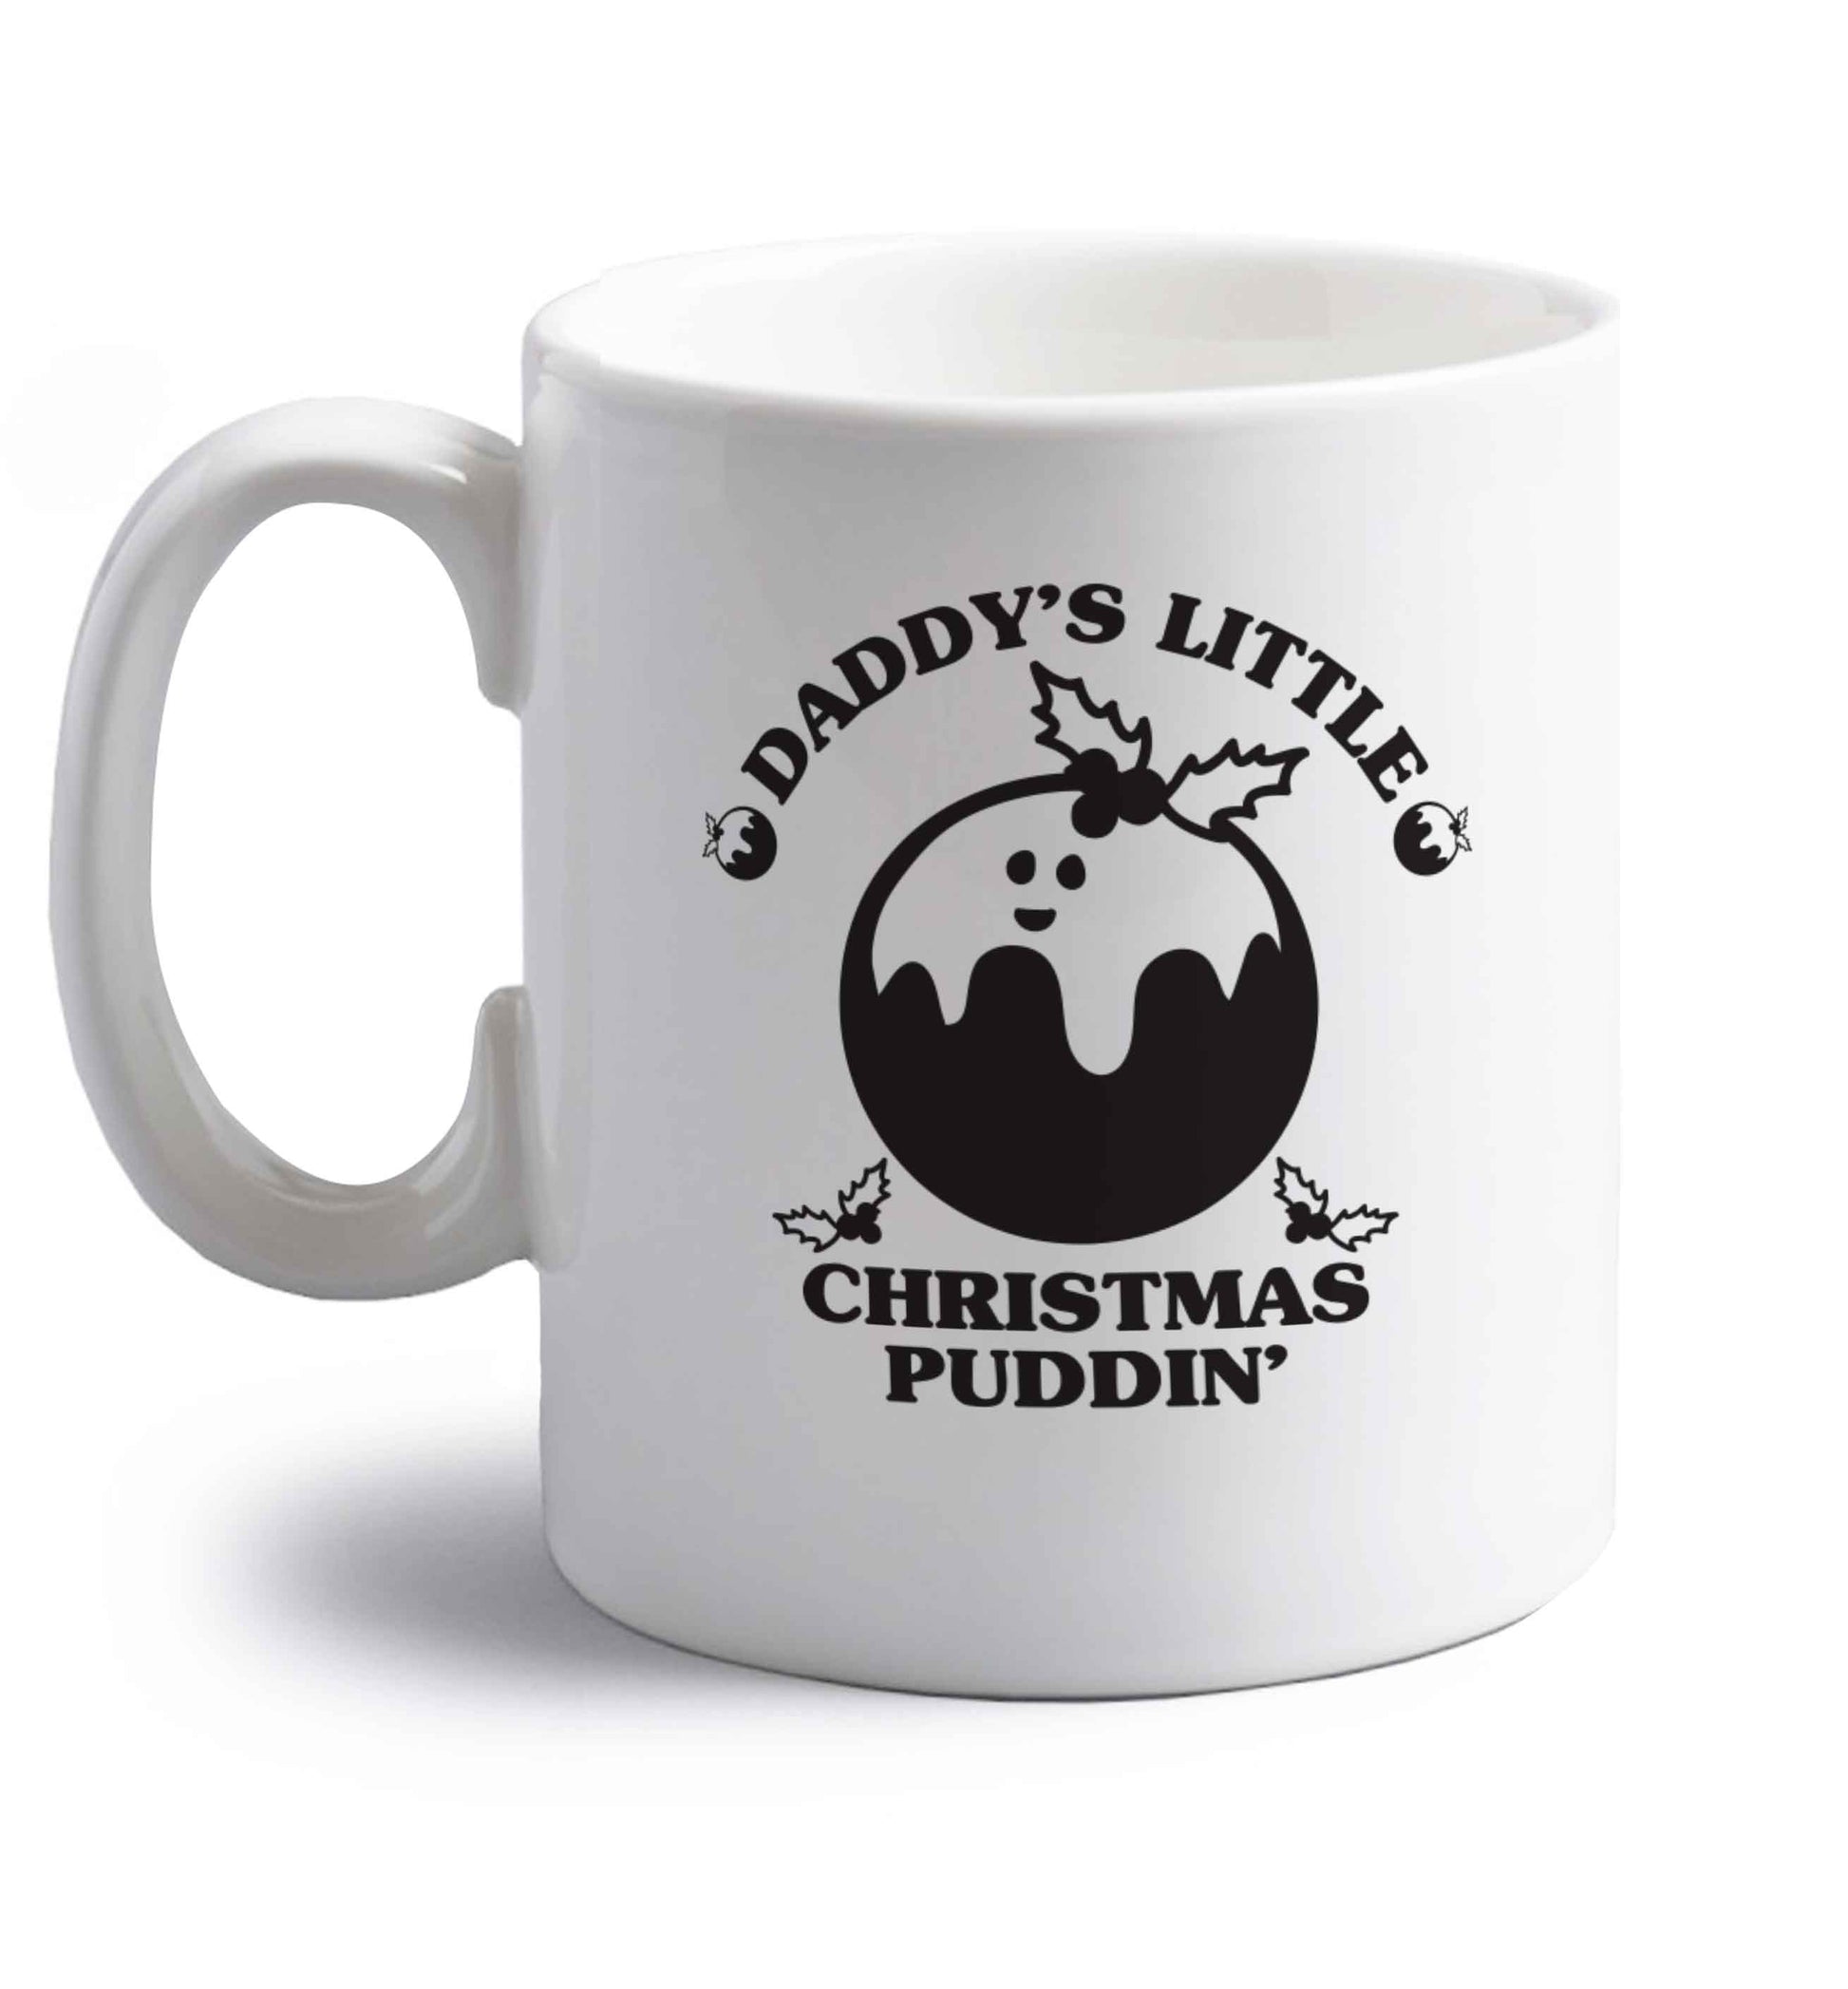 Daddy's little Christmas puddin' right handed white ceramic mug 